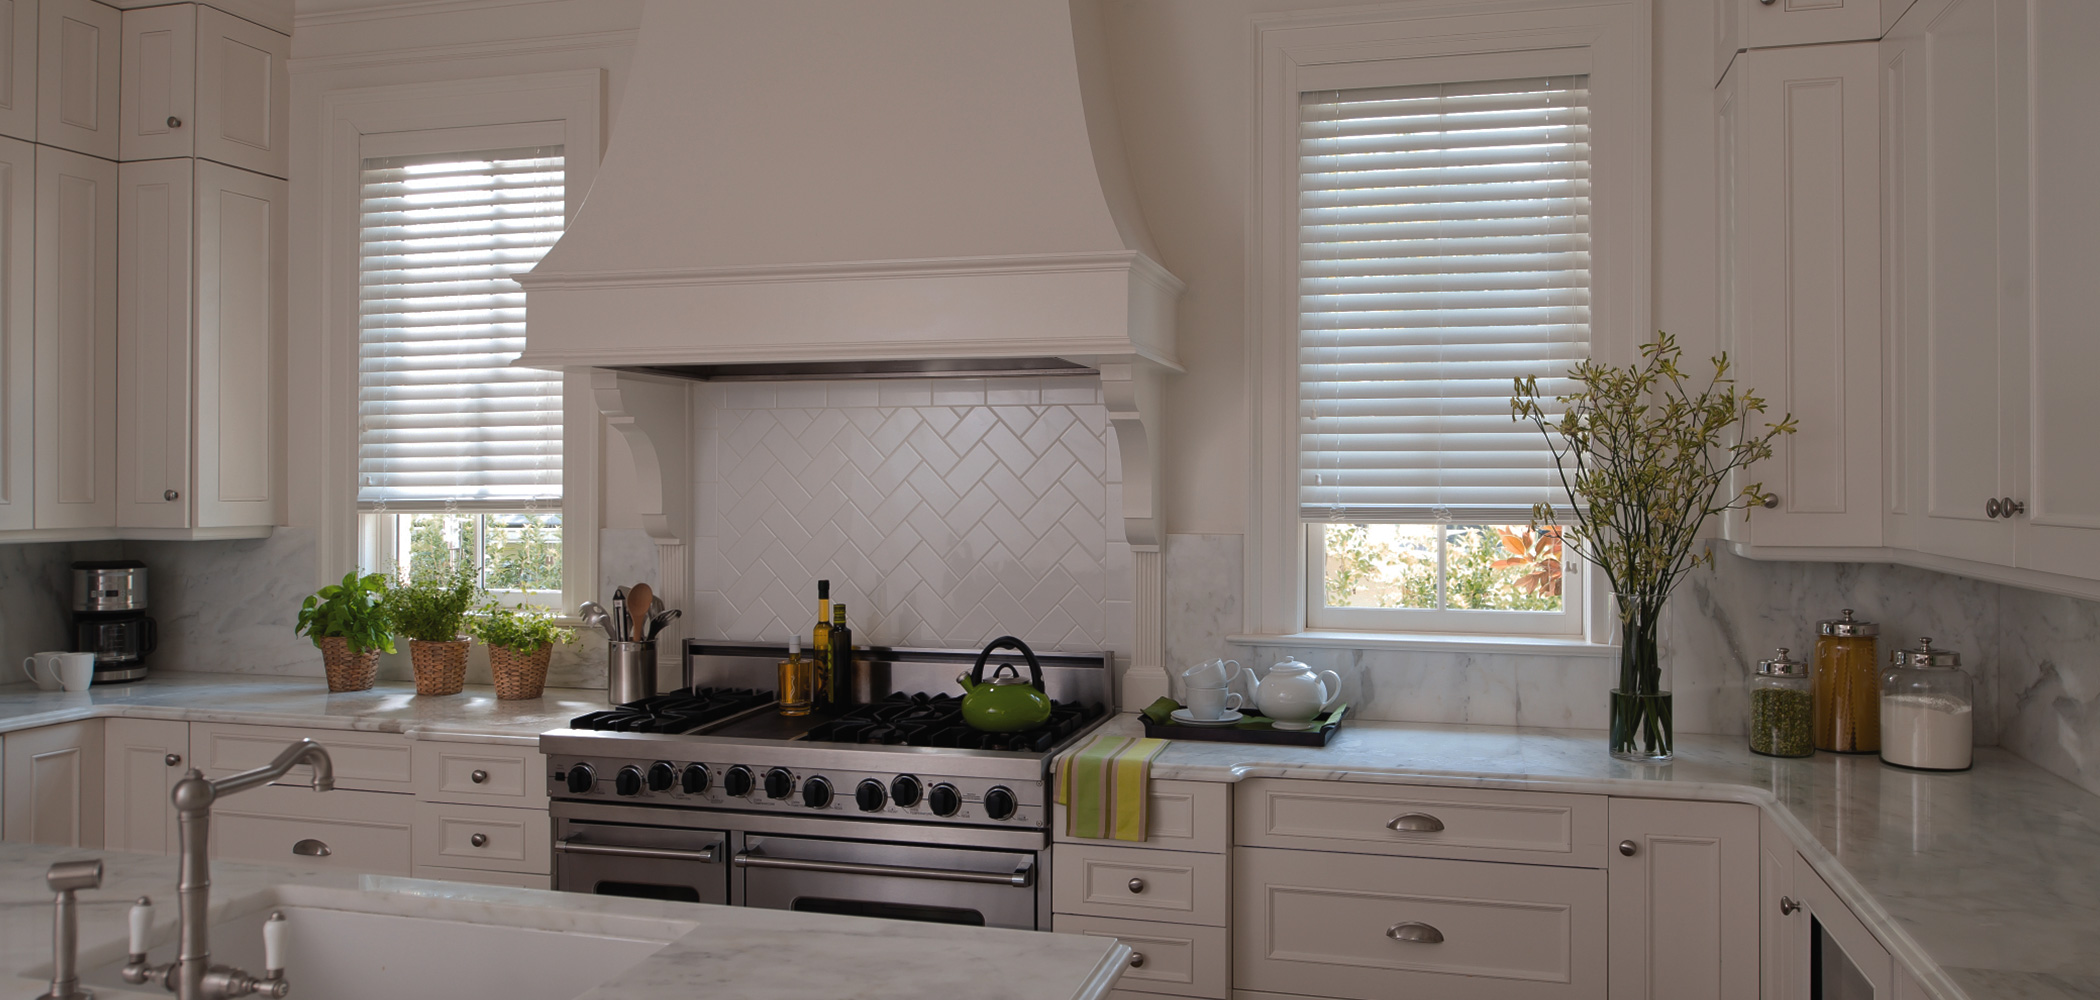 YOUR CHOICE FOR BLINDS, SHUTTERS, SHADES AND MORE